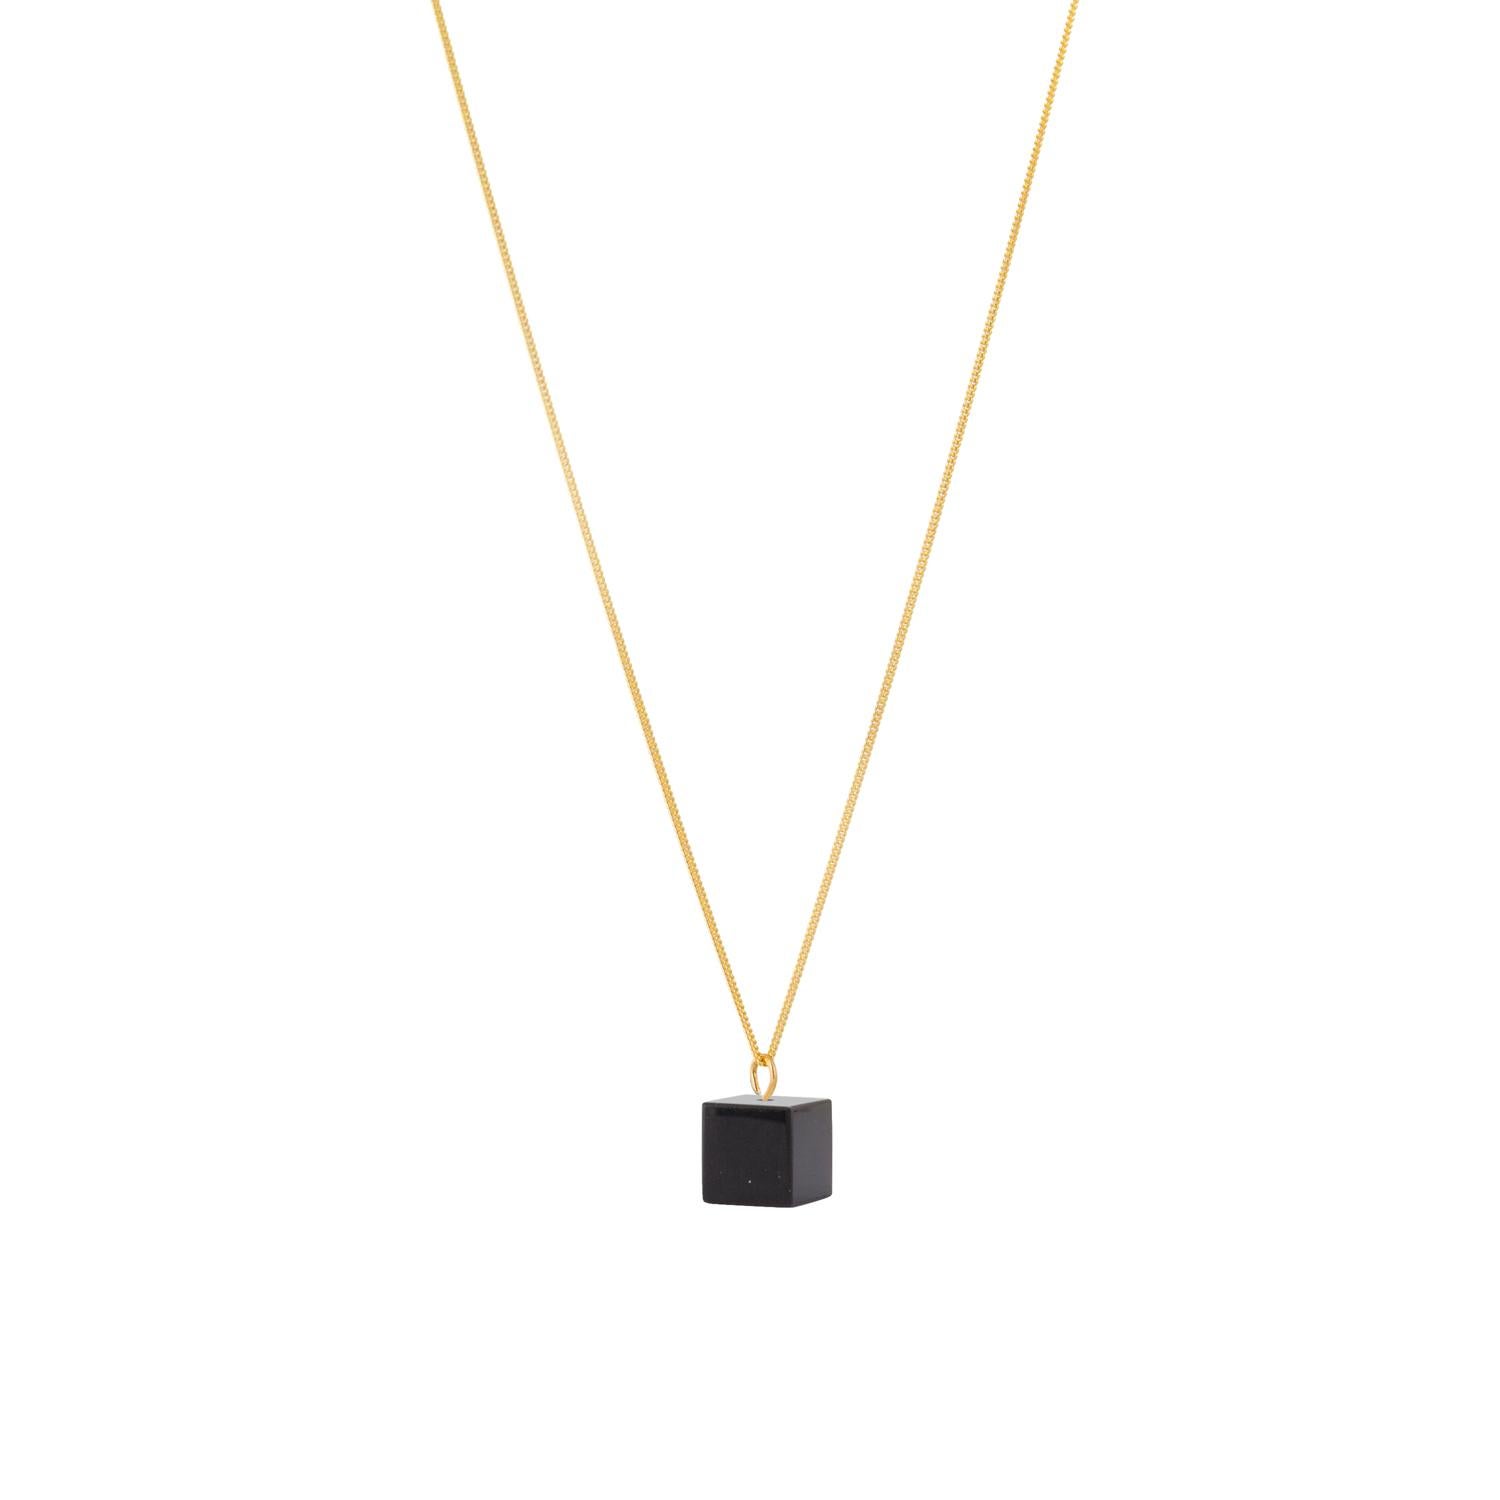 Simple and colourful, this Black Onyx necklace is made in our Northern Irish workshop. Carved by hand the 10 mm cube shape is set to fit onto a 45cm long 9 Carat Gold necklace.

Sourced in India, Black onyx is a deep black monochrome stone which is